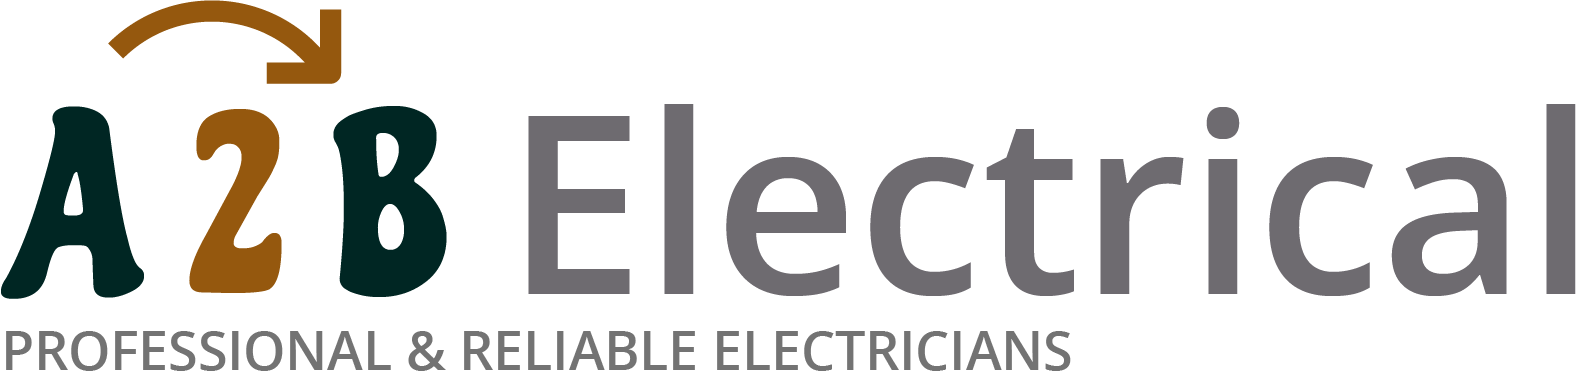 If you have electrical wiring problems in Millwall, we can provide an electrician to have a look for you. 